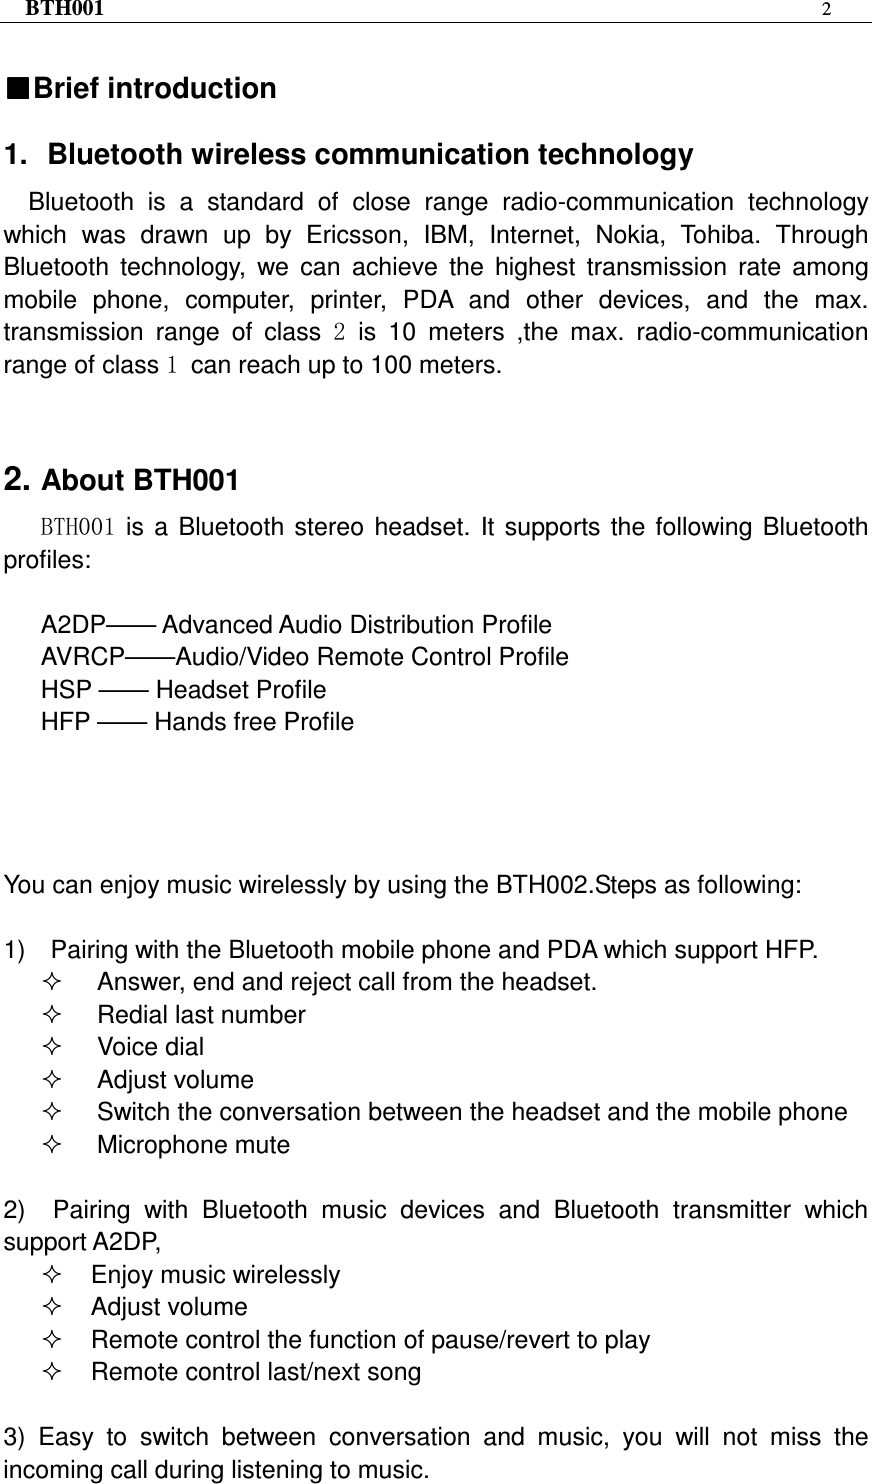 BTH001  2   ■■■■Brief introduction    1.  Bluetooth wireless communication technology Bluetooth  is  a  standard  of  close  range  radio-communication  technology which  was  drawn  up  by  Ericsson,  IBM,  Internet,  Nokia,  Tohiba.  Through Bluetooth  technology,  we  can  achieve  the  highest  transmission  rate  among mobile  phone,  computer,  printer,  PDA  and  other  devices,  and  the  max. transmission  range  of  class  2 is  10  meters  ,the  max.  radio-communication range of class 1 can reach up to 100 meters.   2. About BTH001 BTH001  is  a  Bluetooth  stereo  headset.  It  supports  the  following  Bluetooth profiles:  A2DP—— Advanced Audio Distribution Profile AVRCP——Audio/Video Remote Control Profile HSP —— Headset Profile   HFP —— Hands free Profile         You can enjoy music wirelessly by using the BTH002.Steps as following:  1)    Pairing with the Bluetooth mobile phone and PDA which support HFP.   Answer, end and reject call from the headset.   Redial last number   Voice dial   Adjust volume   Switch the conversation between the headset and the mobile phone     Microphone mute  2)    Pairing  with  Bluetooth  music  devices  and  Bluetooth  transmitter  which support A2DP,   Enjoy music wirelessly   Adjust volume   Remote control the function of pause/revert to play   Remote control last/next song  3) Easy  to  switch  between  conversation  and  music,  you  will  not  miss  the incoming call during listening to music. 